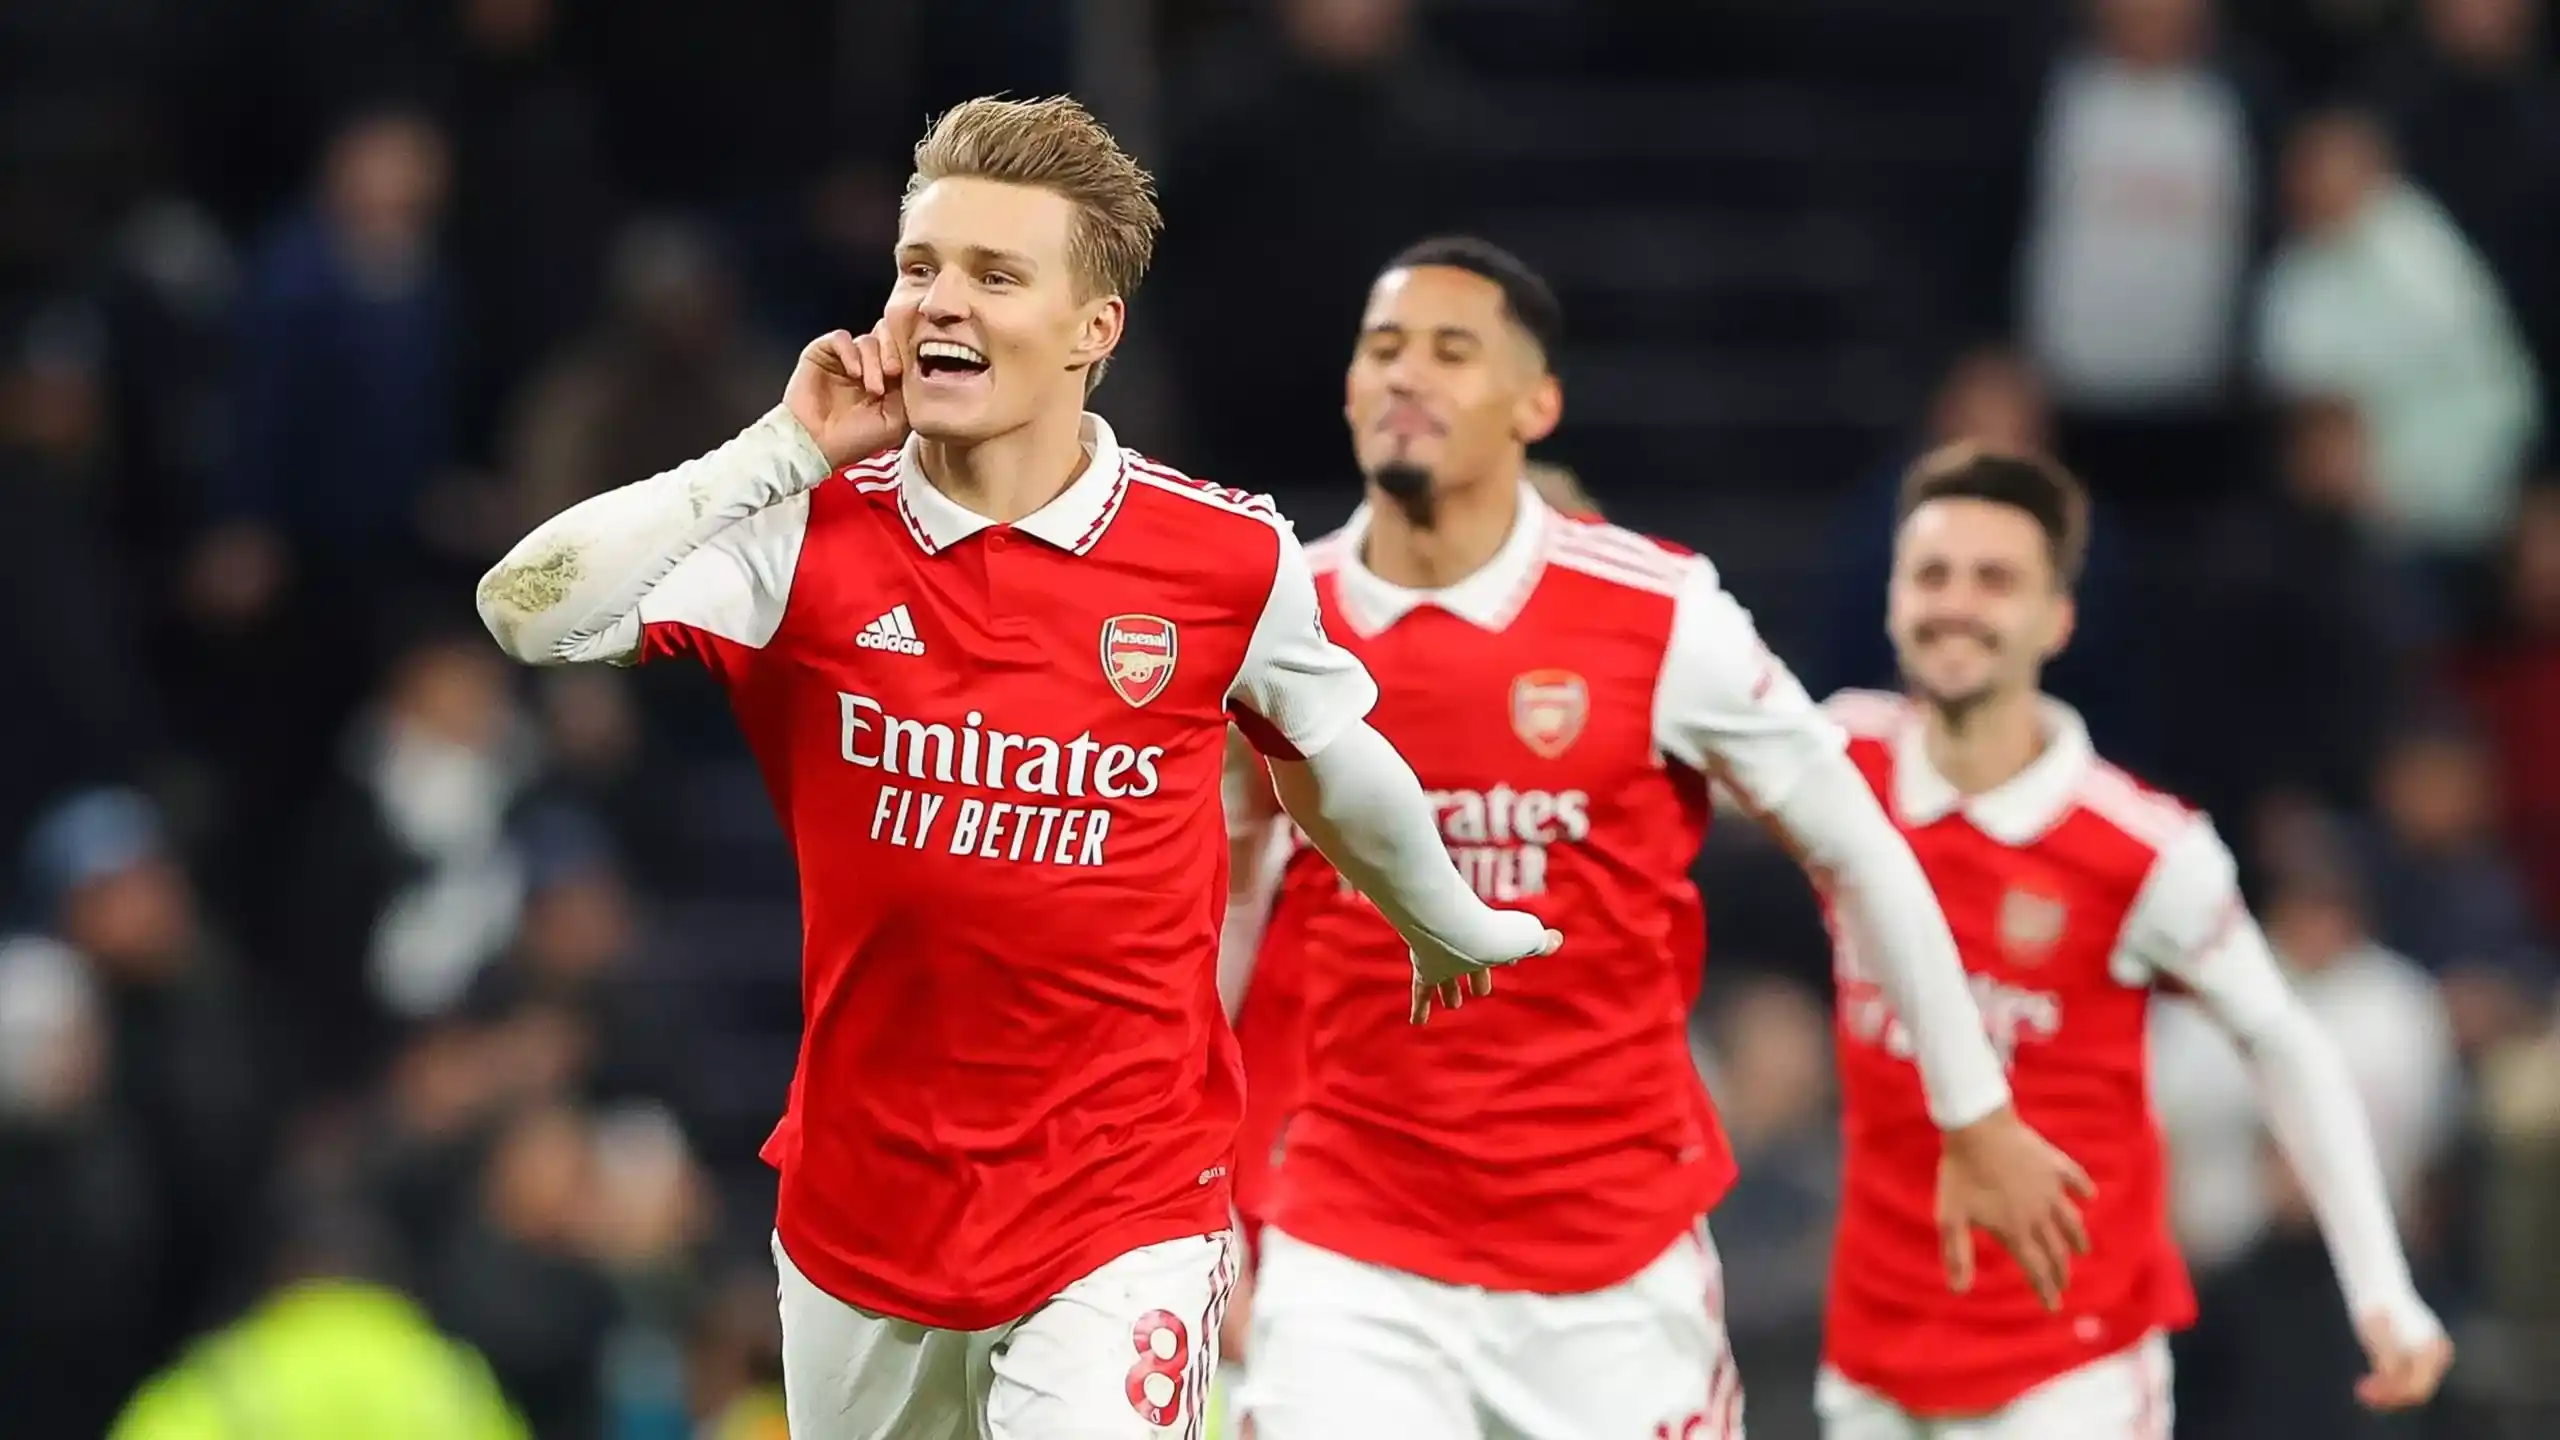 Martin Odegaard puts Arsenal ahead in crucial game against Chelsea